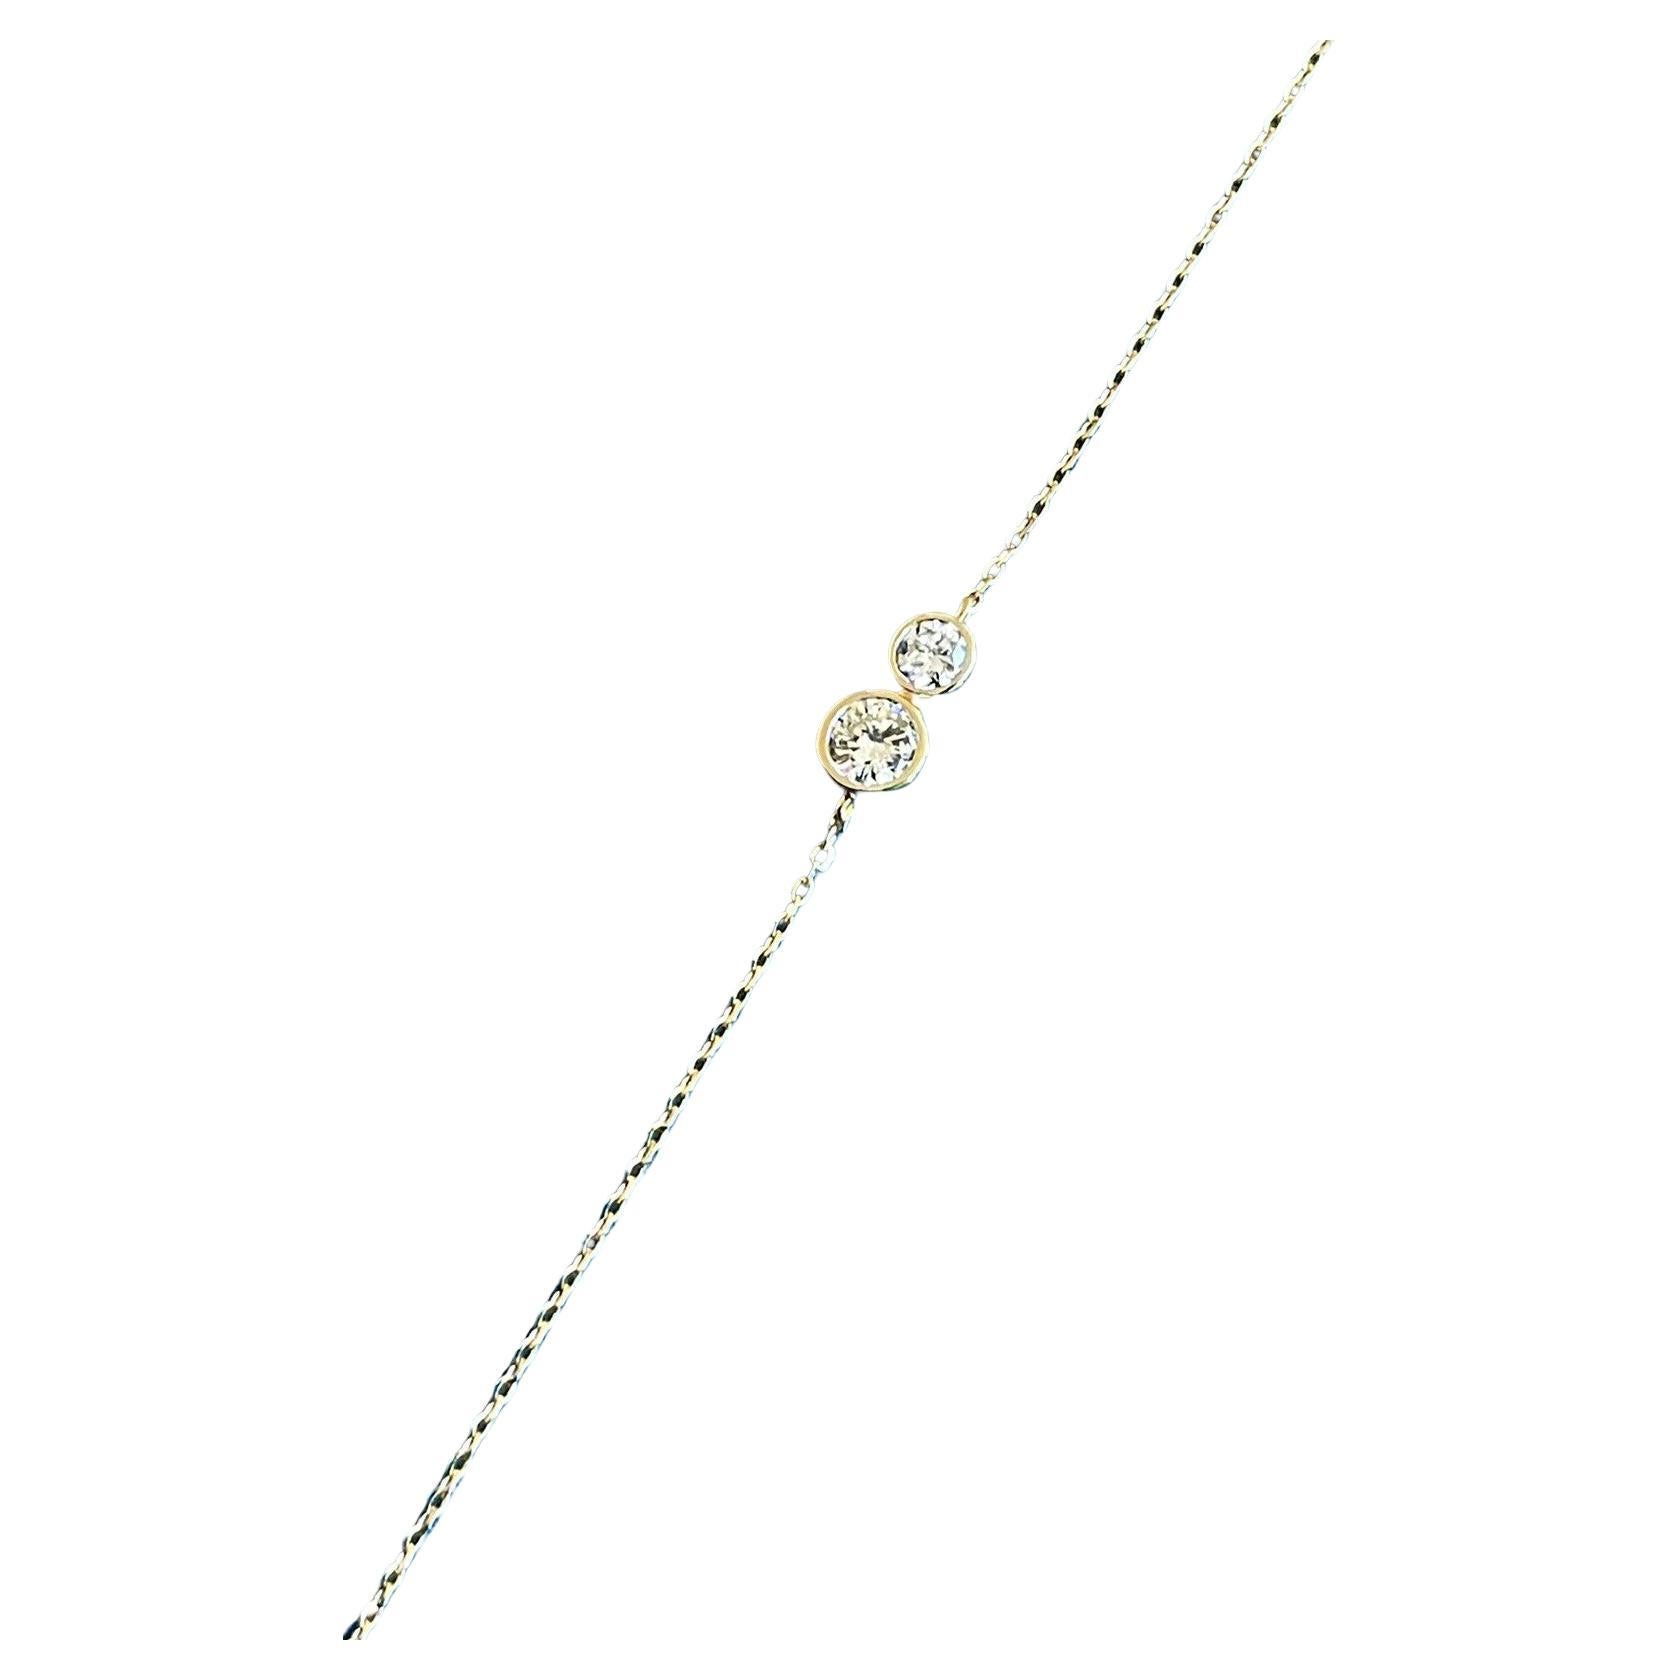 Cervin Blanc 18ct Yellow Gold Diamond Bracelet 0.30ct Solitaire ‘You & I’ For Sale